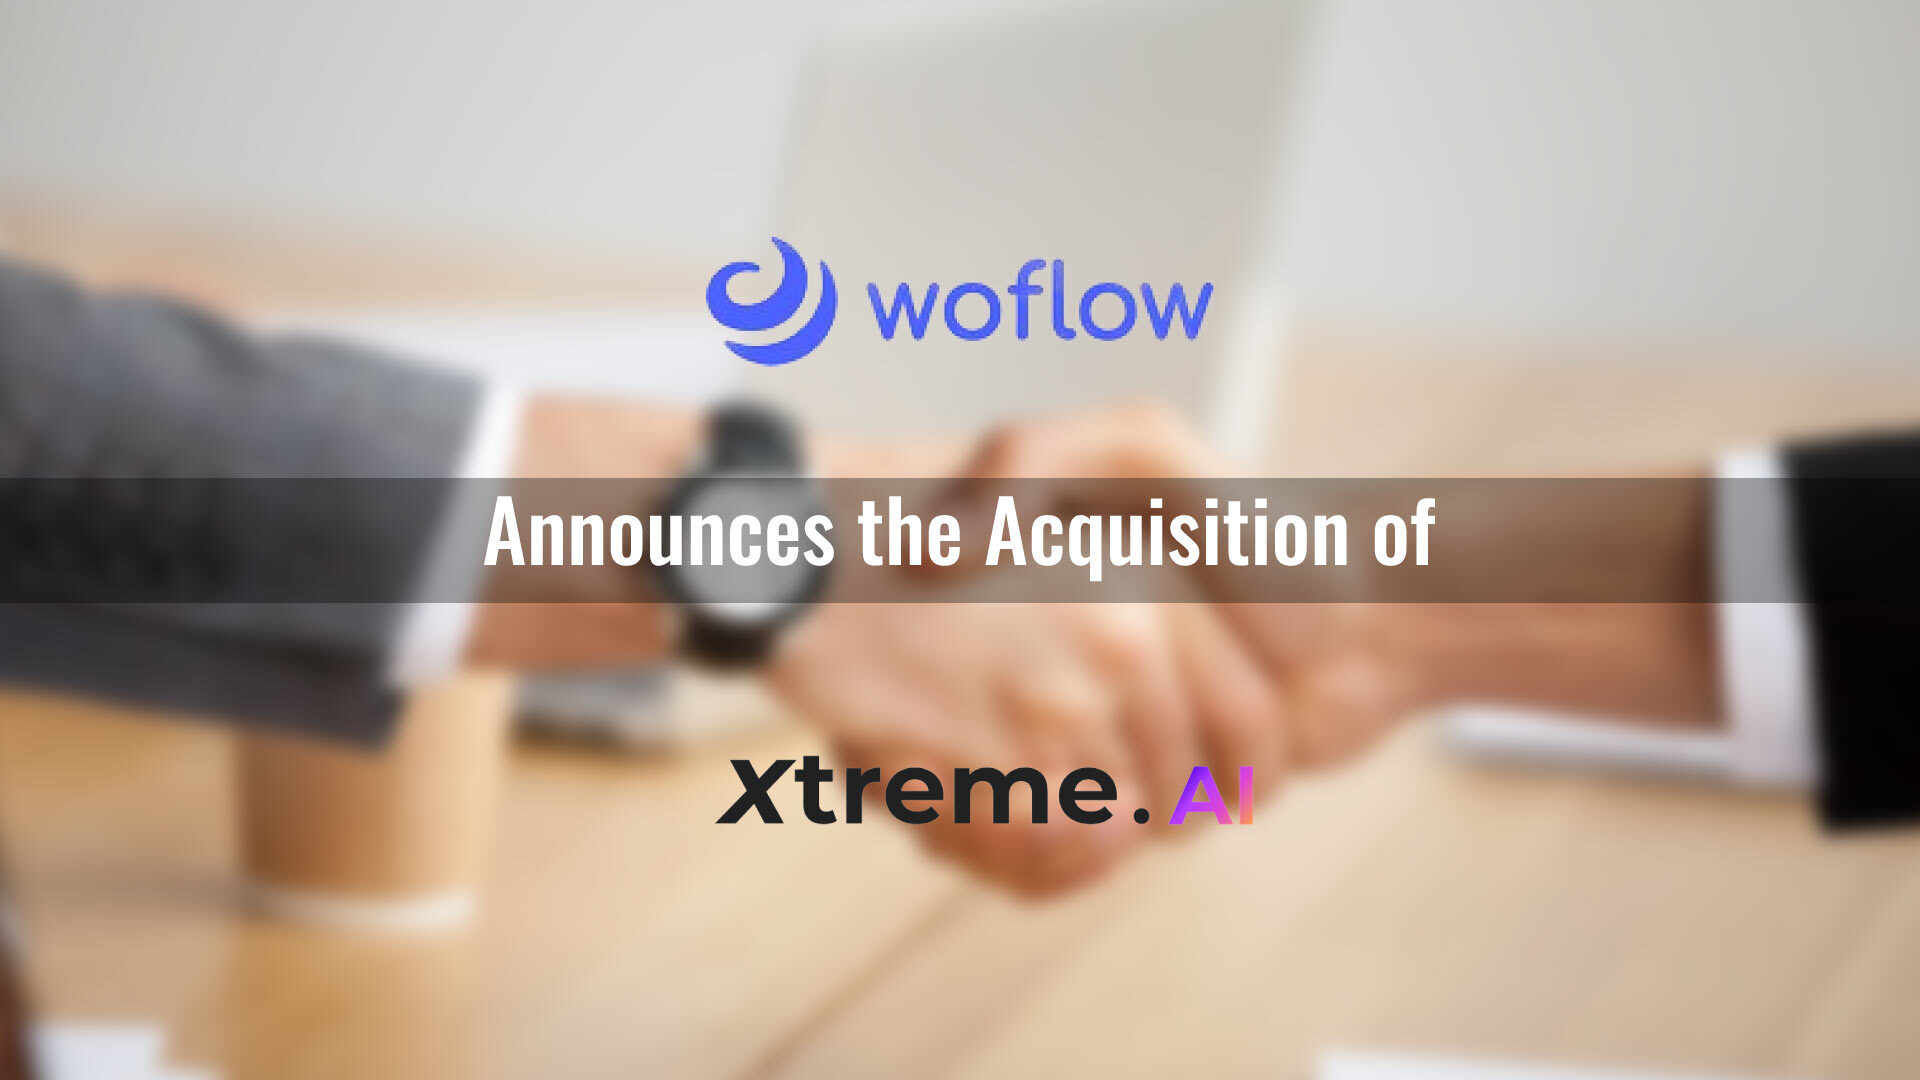 Woflow Acquires European Startup XtremeAI, Expanding Reach and Bolstering AI Capabilities